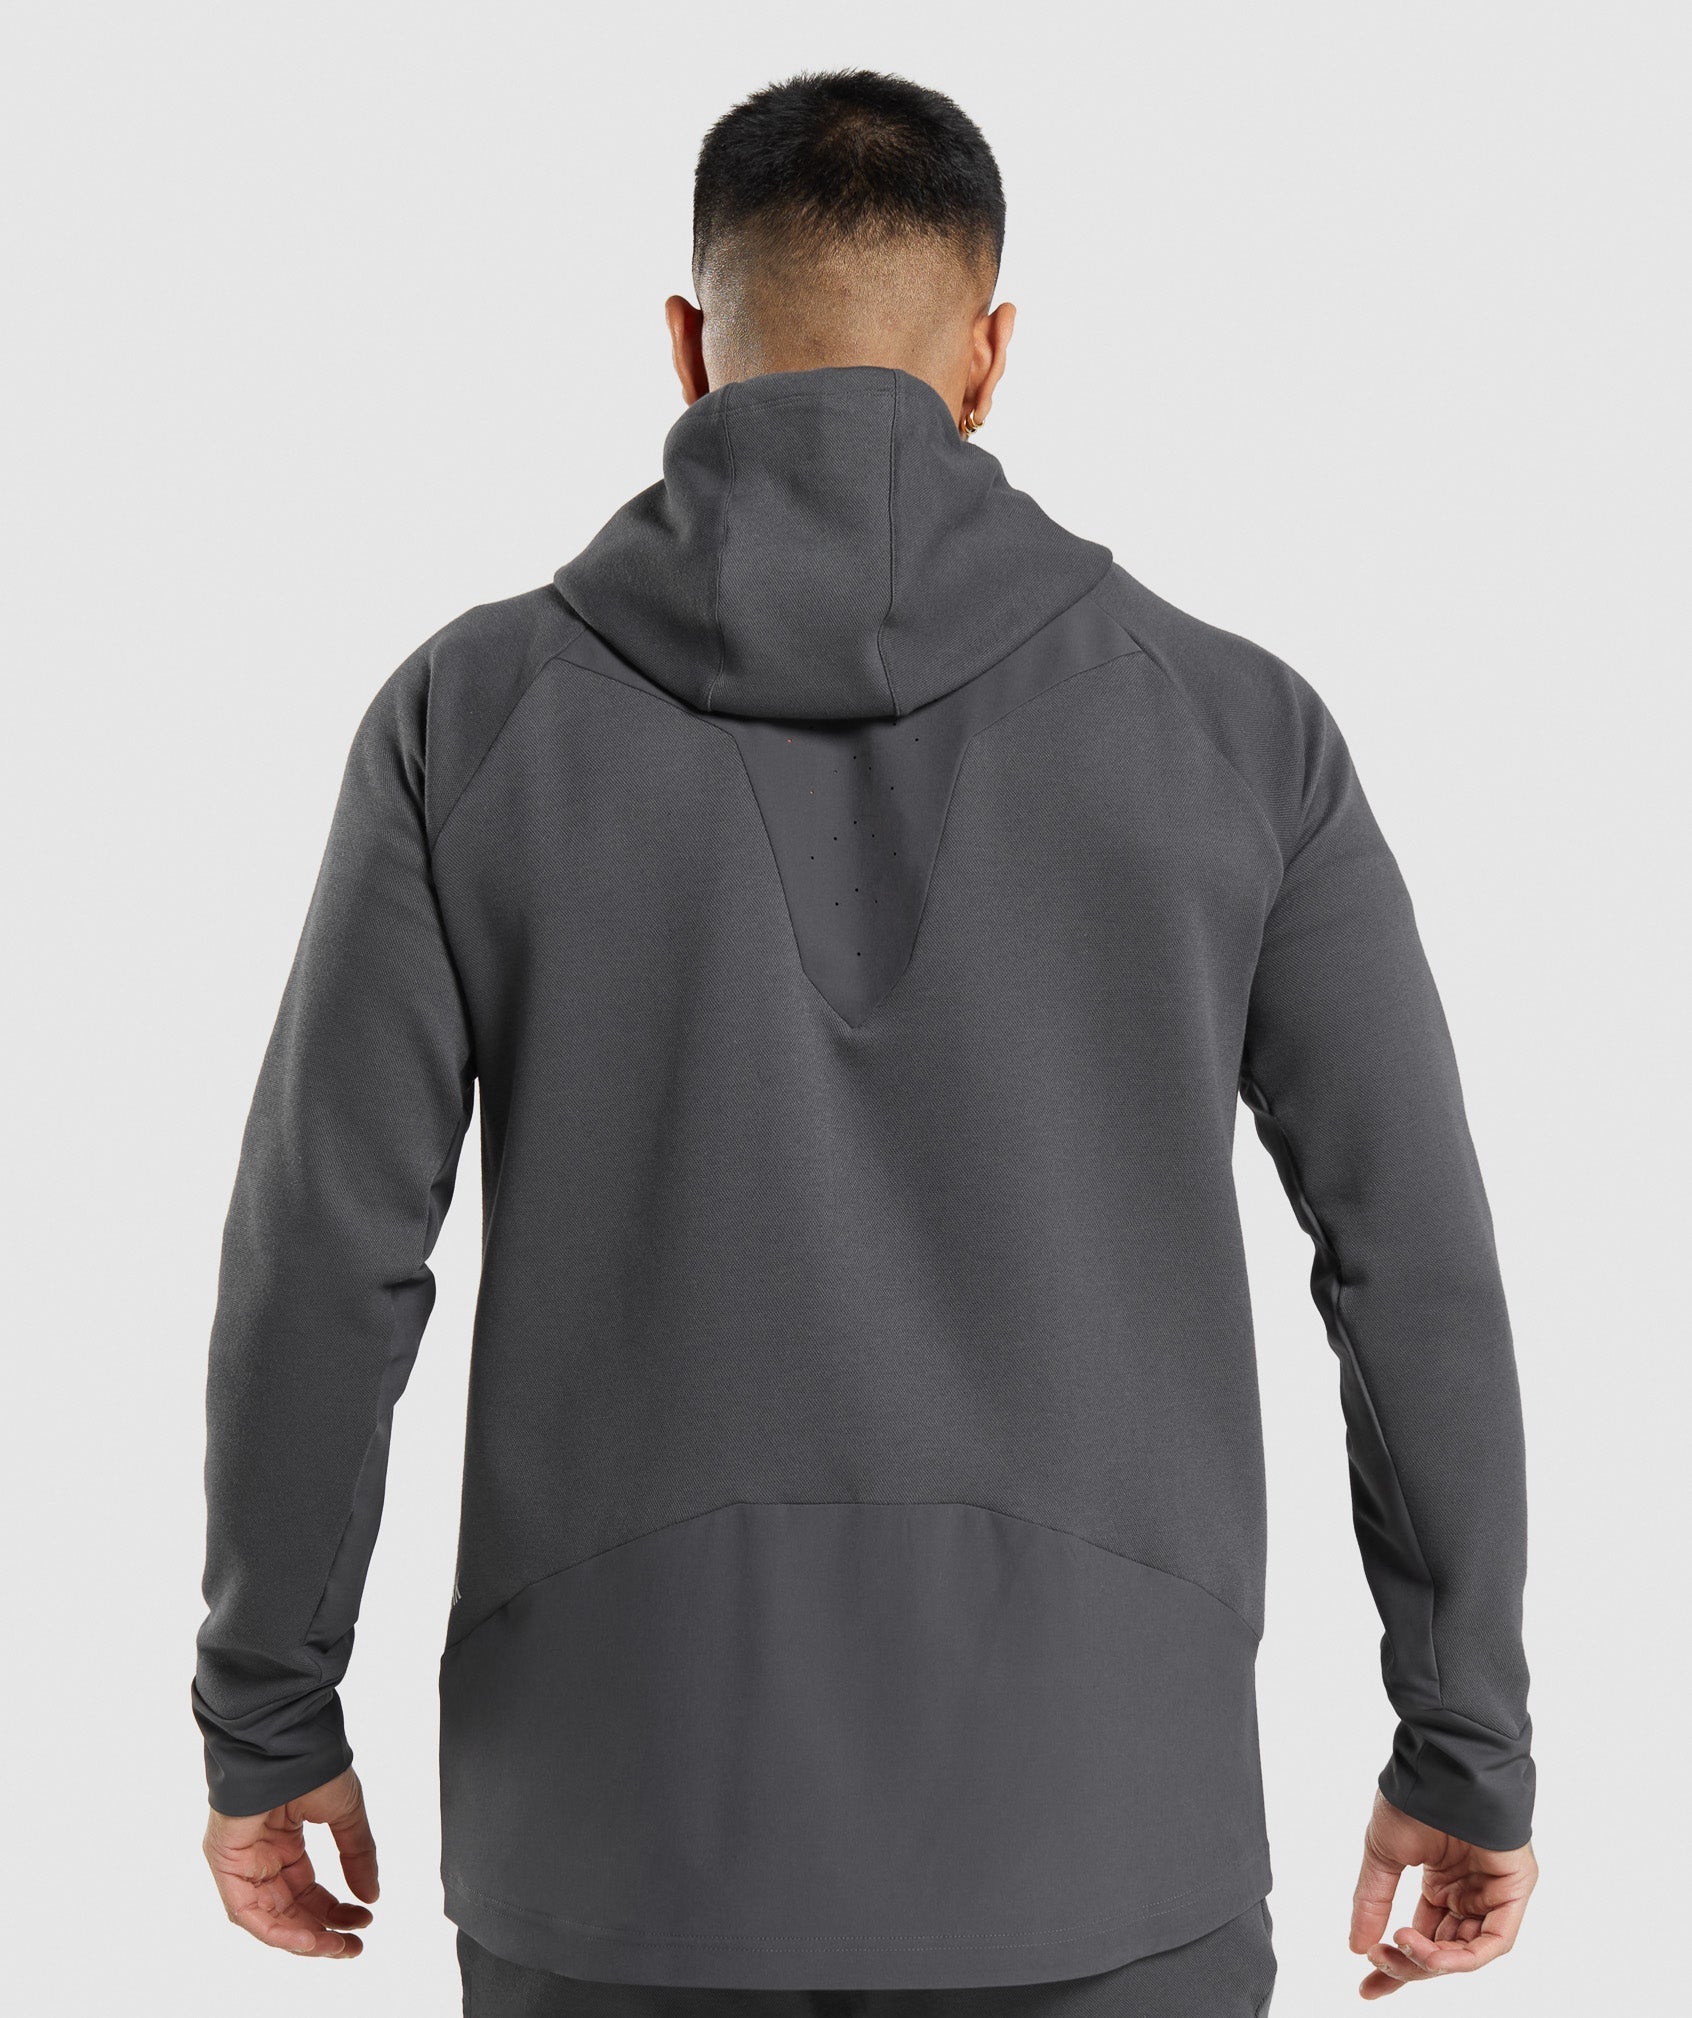 Apex Technical Jacket in Onyx Grey - view 3